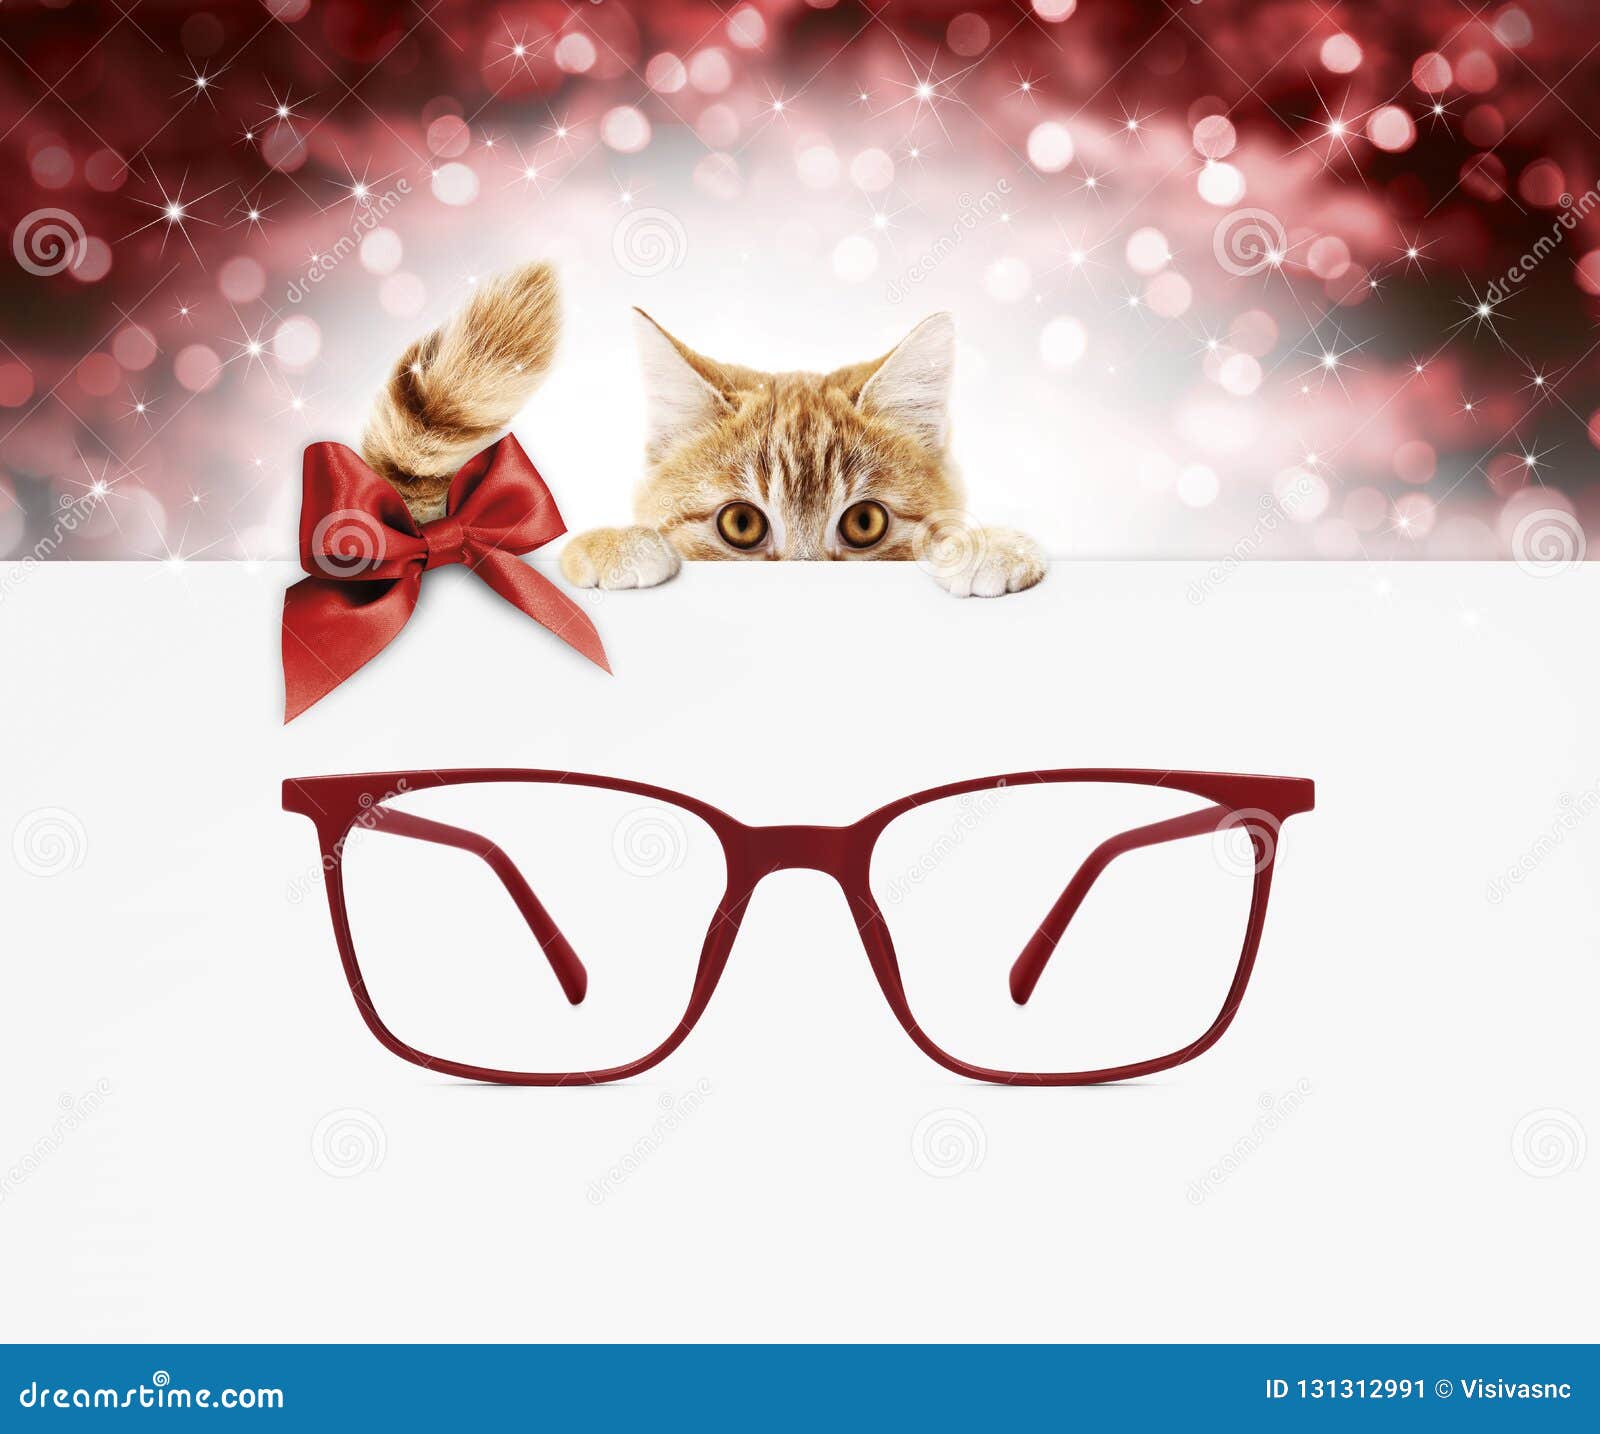 christmas eyeglasses gift card, ginger cat with red spectacles a